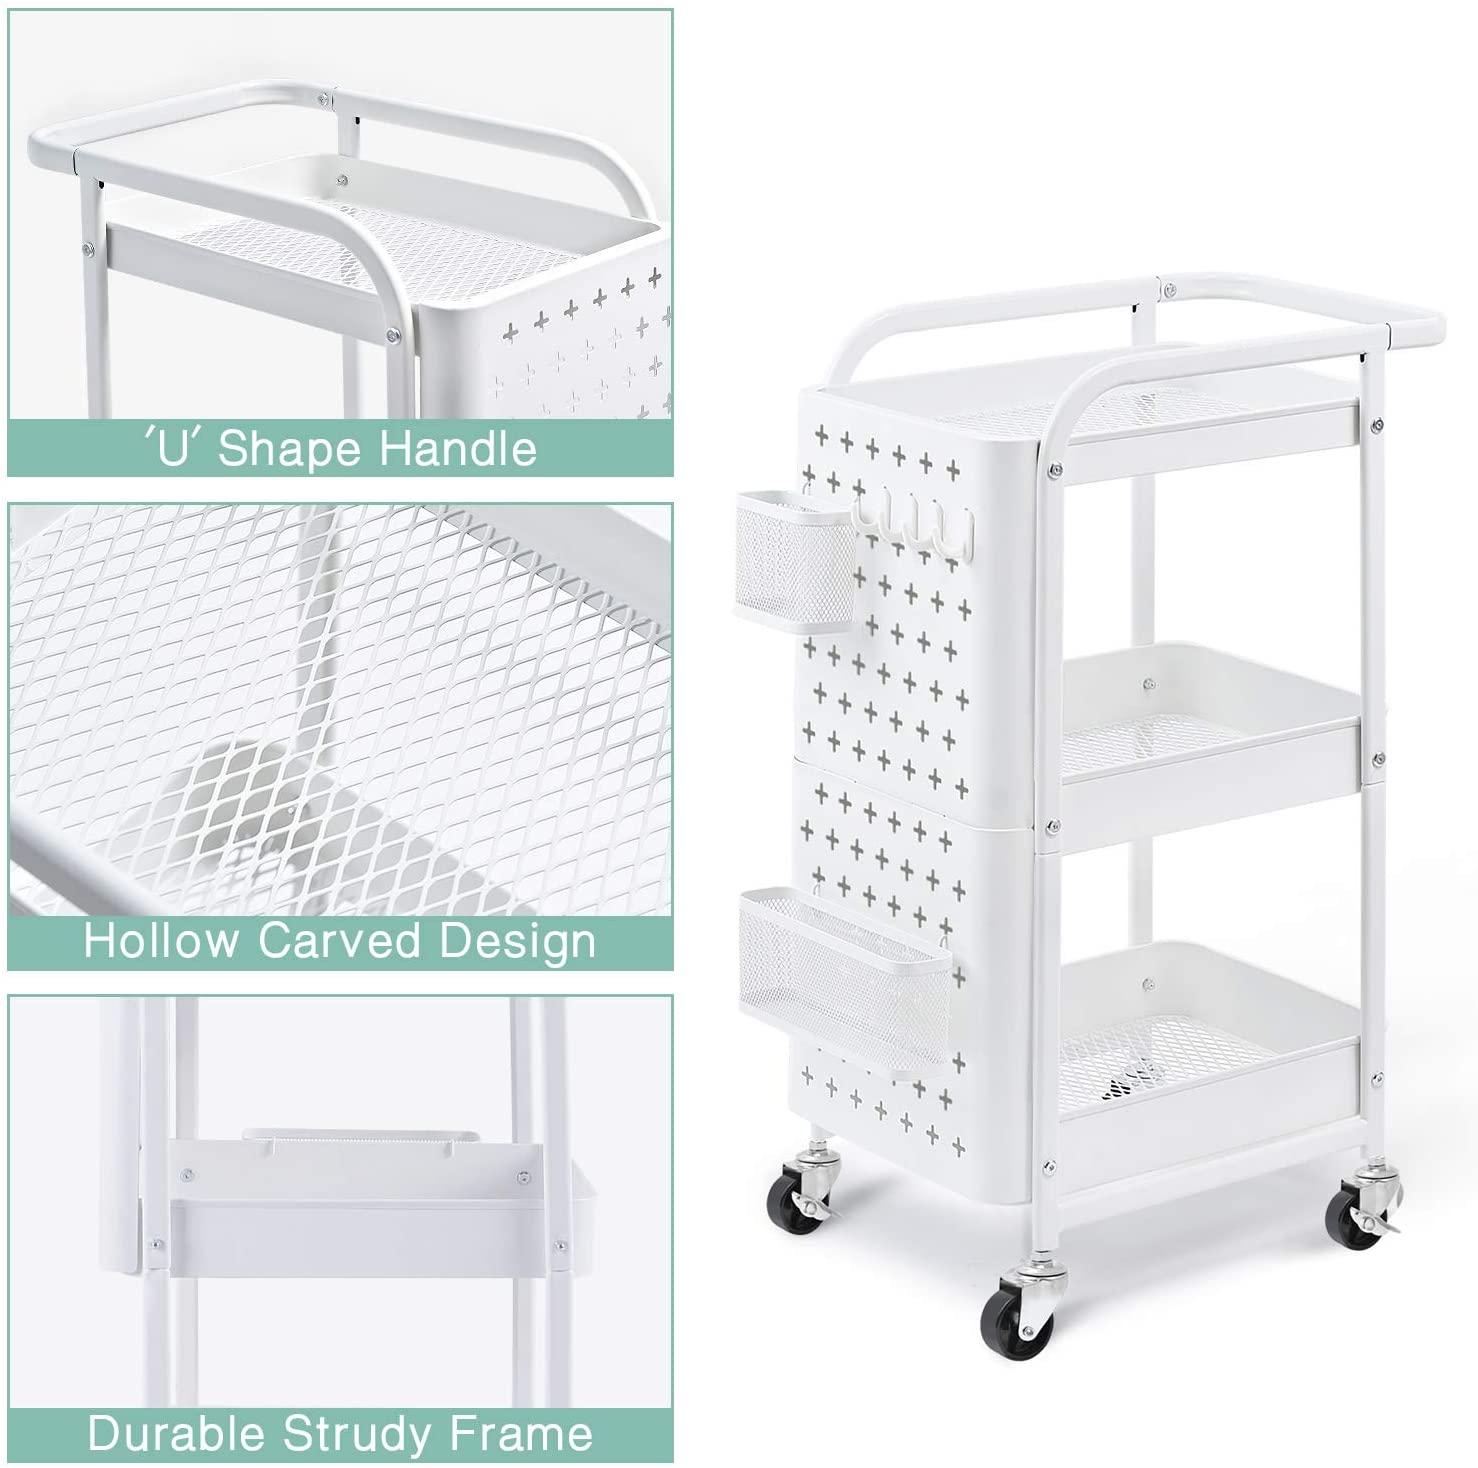 3 Tier Storage Rolling Cart, Heavy Duty Rolling Utility Cart Metal Push Cart with Pegboard and Extra Baskets Hooks, Trolley Organizer Cart with Utility Handle for Kitchen Office Home, White - image 4 of 7